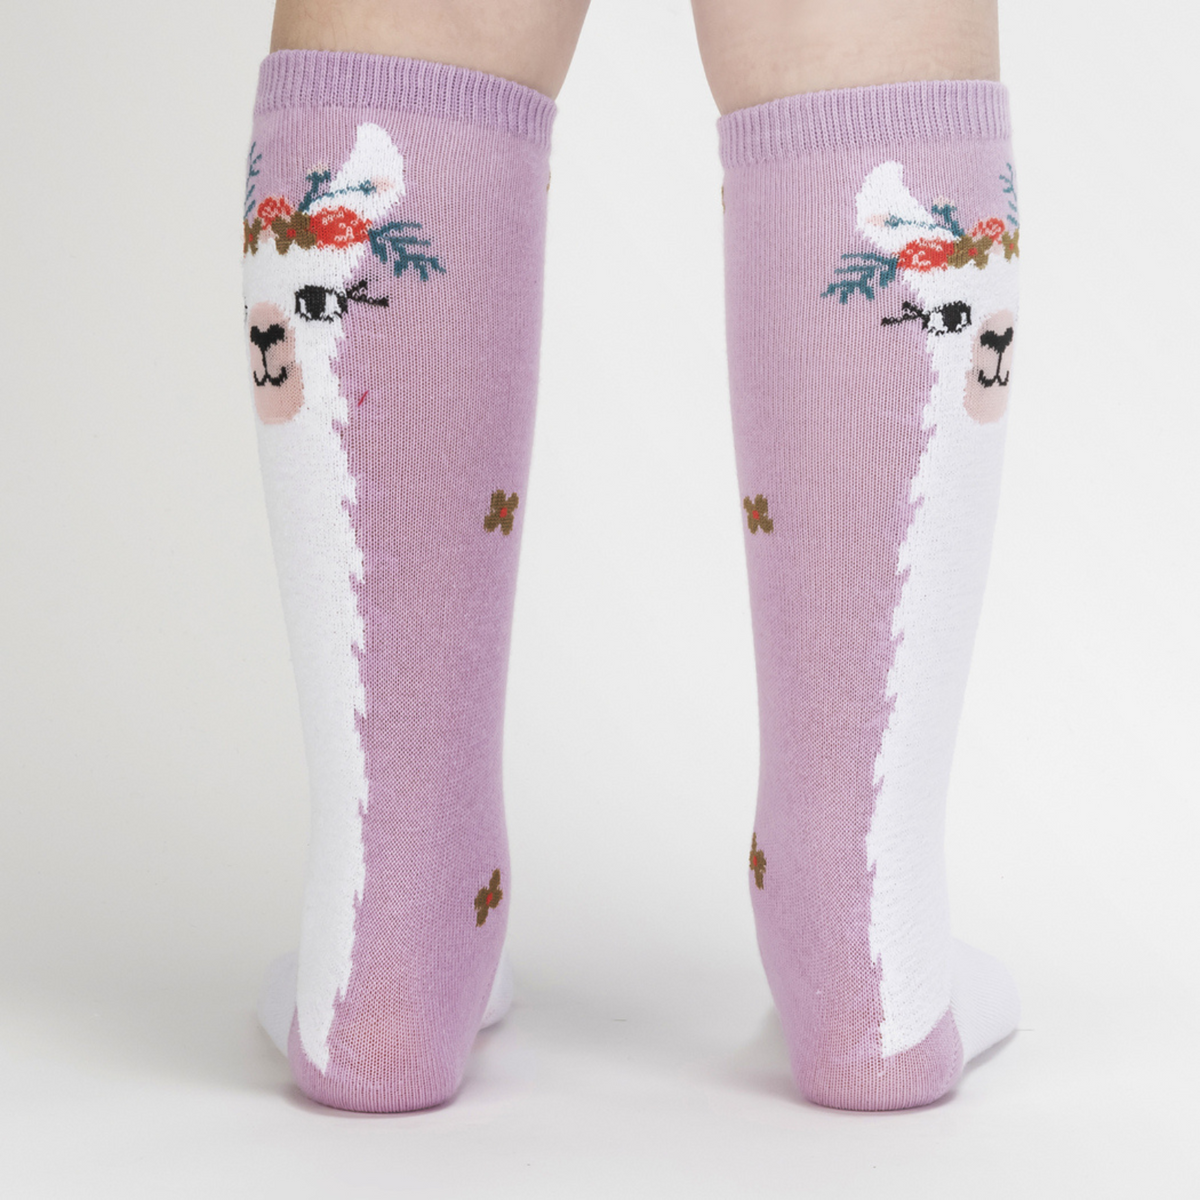 Sock It To Me Llama Queen kids&#39; sock featuring purple knee high sock with white llama wearing a floral crown worn by model seen from back